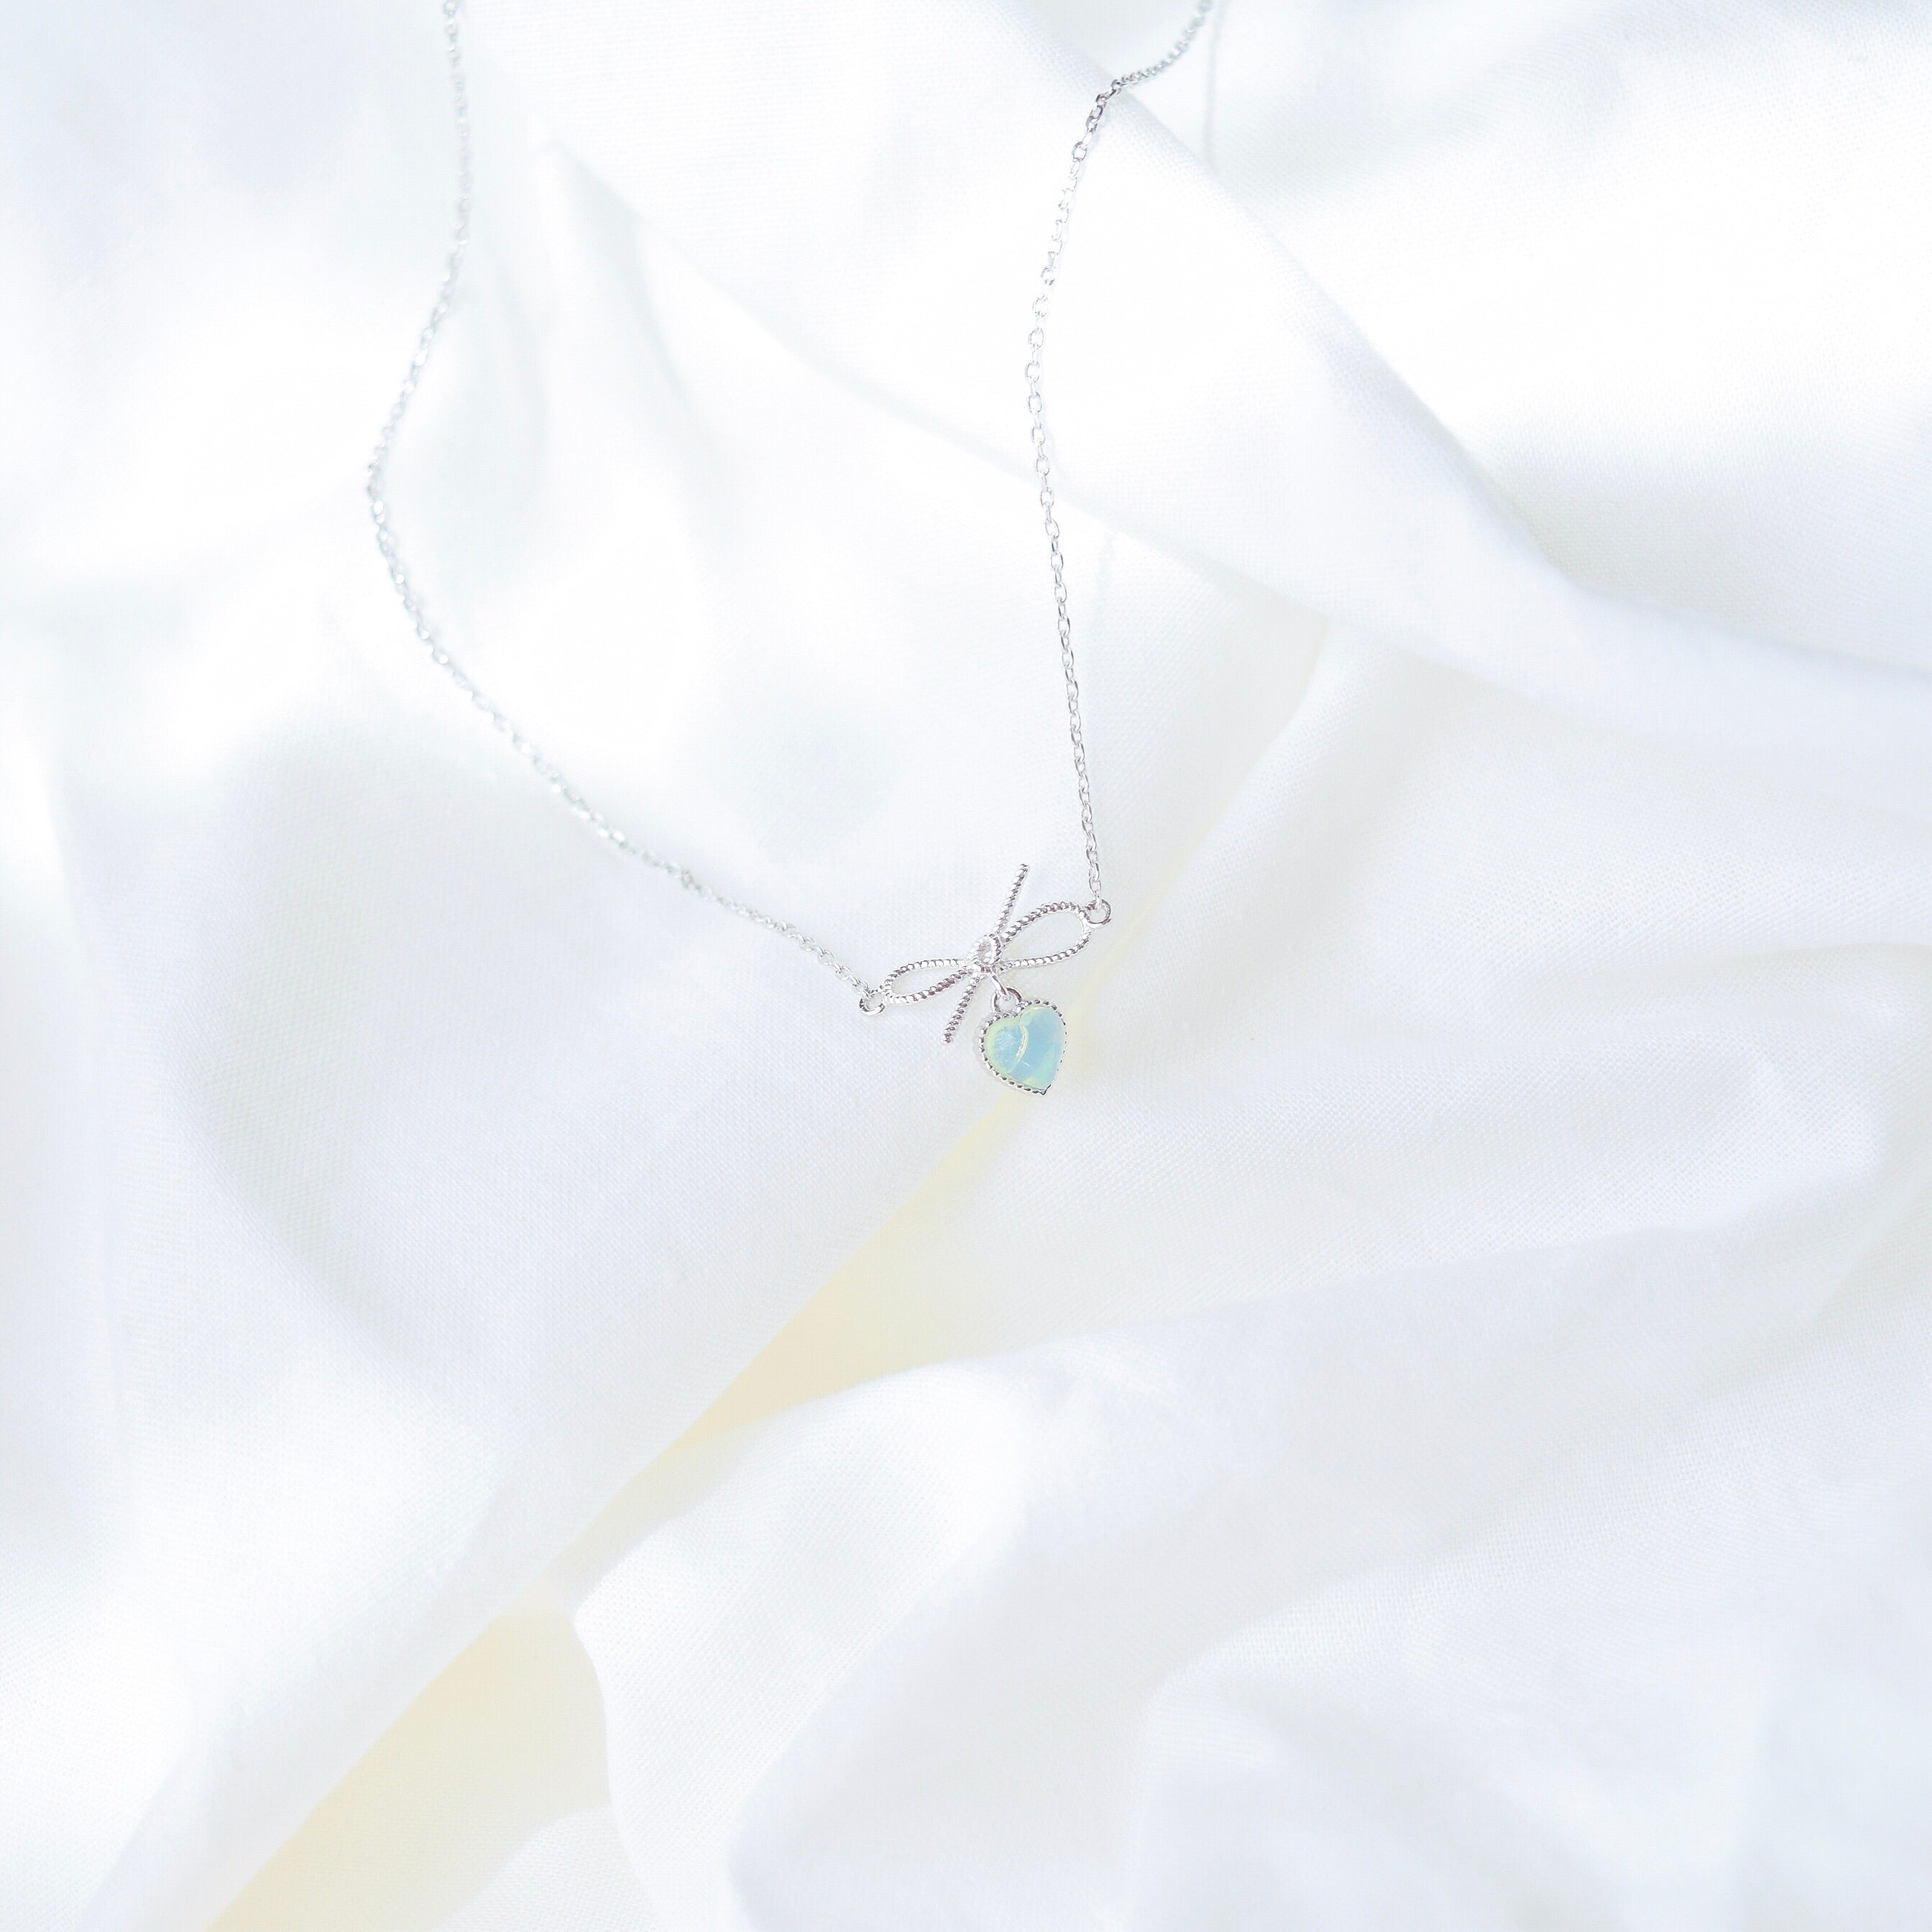 Silver Made in Korea Necklace Korean Rantai Leher Cubic Zirconia Bride Bridal Dinner Rhodium Plated Accessory Fashion Fancy Stylish Jewellery Online Malaysia Shopping Trendy Accessories Daily Wear Jewelry Dainty Minimalist Delicate Special Perfect Gift From Heart For Your Loved One